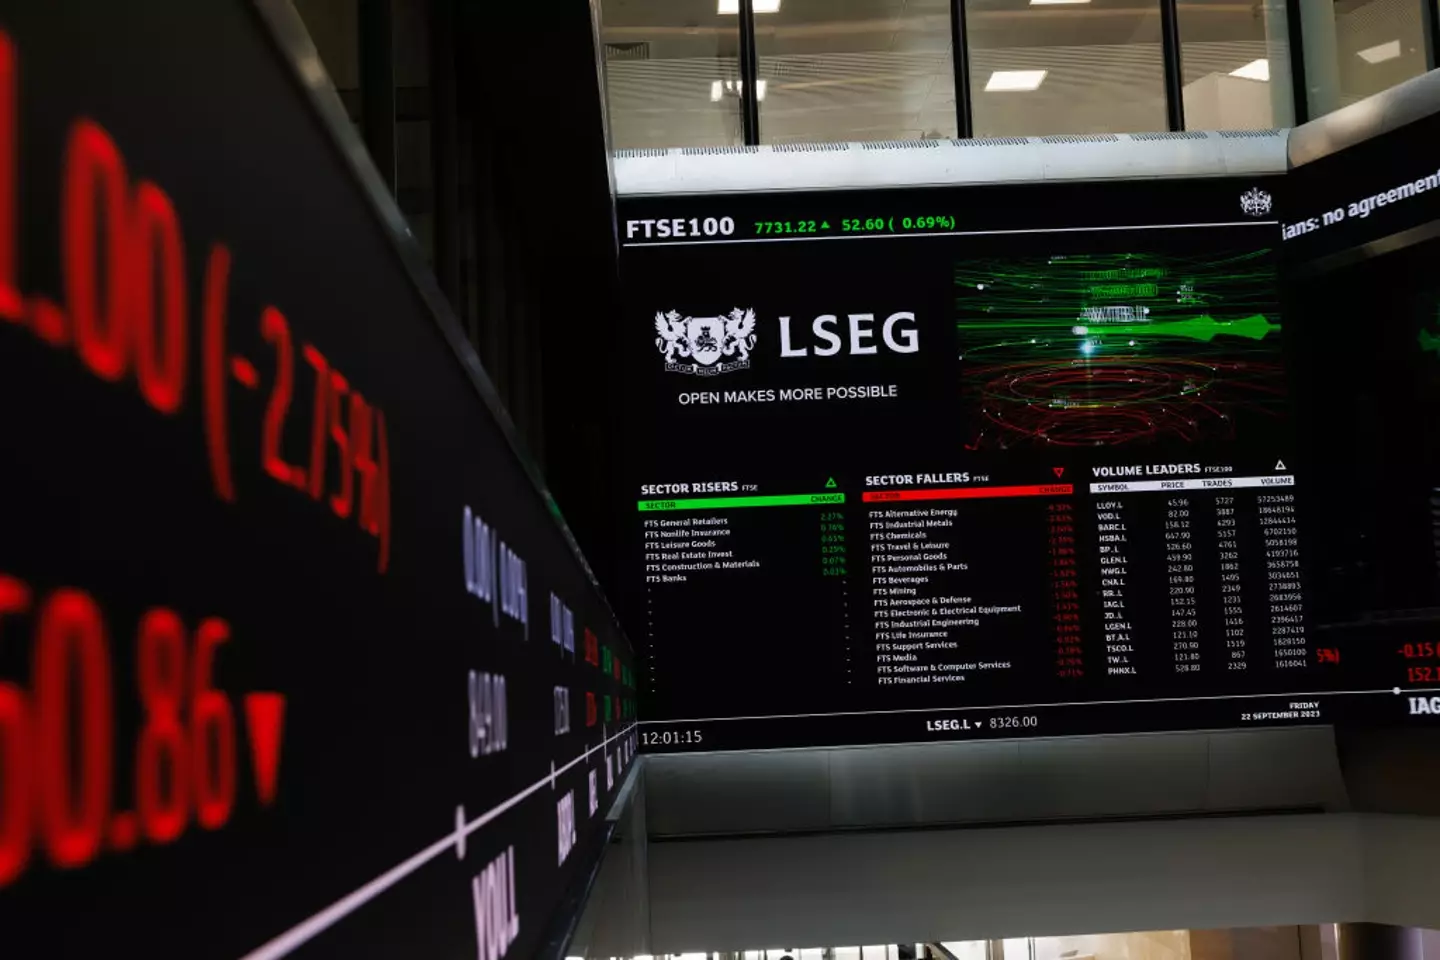 Inside the foyer of the London Stock Exchange.